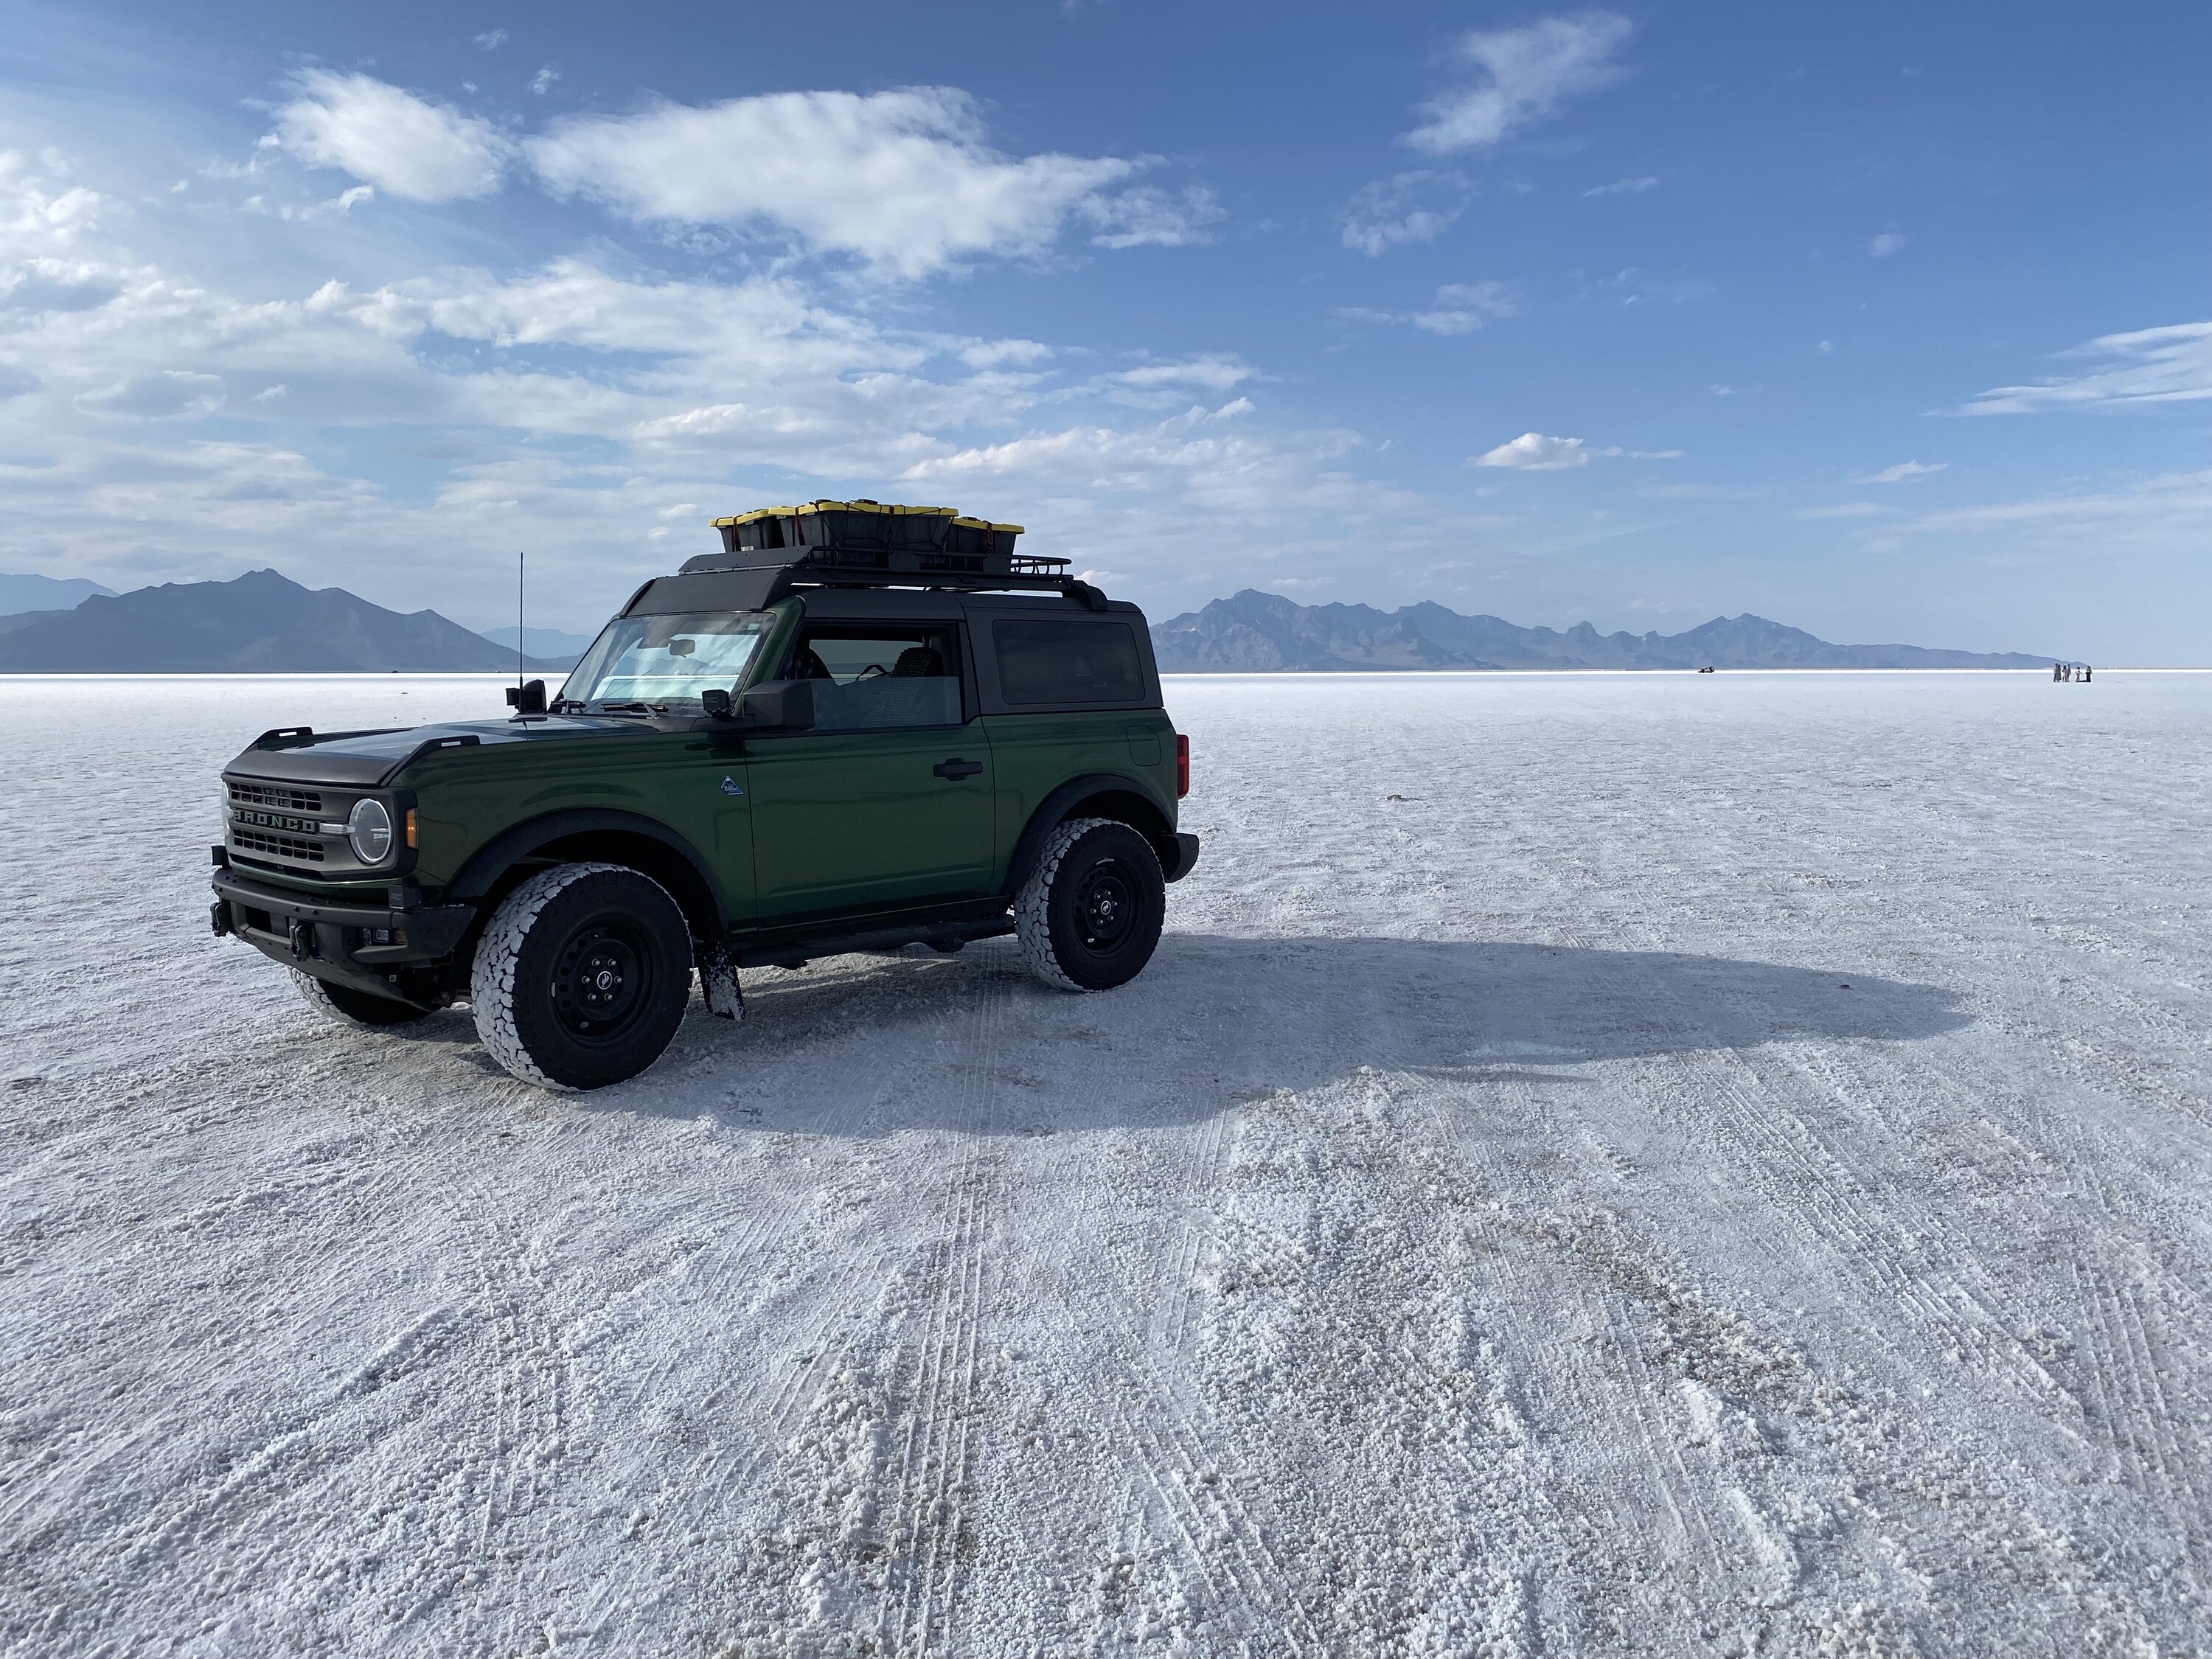 Ford Bronco 2 Door Broncos - What’s on your roof racks? [Photos Thread] saltflats